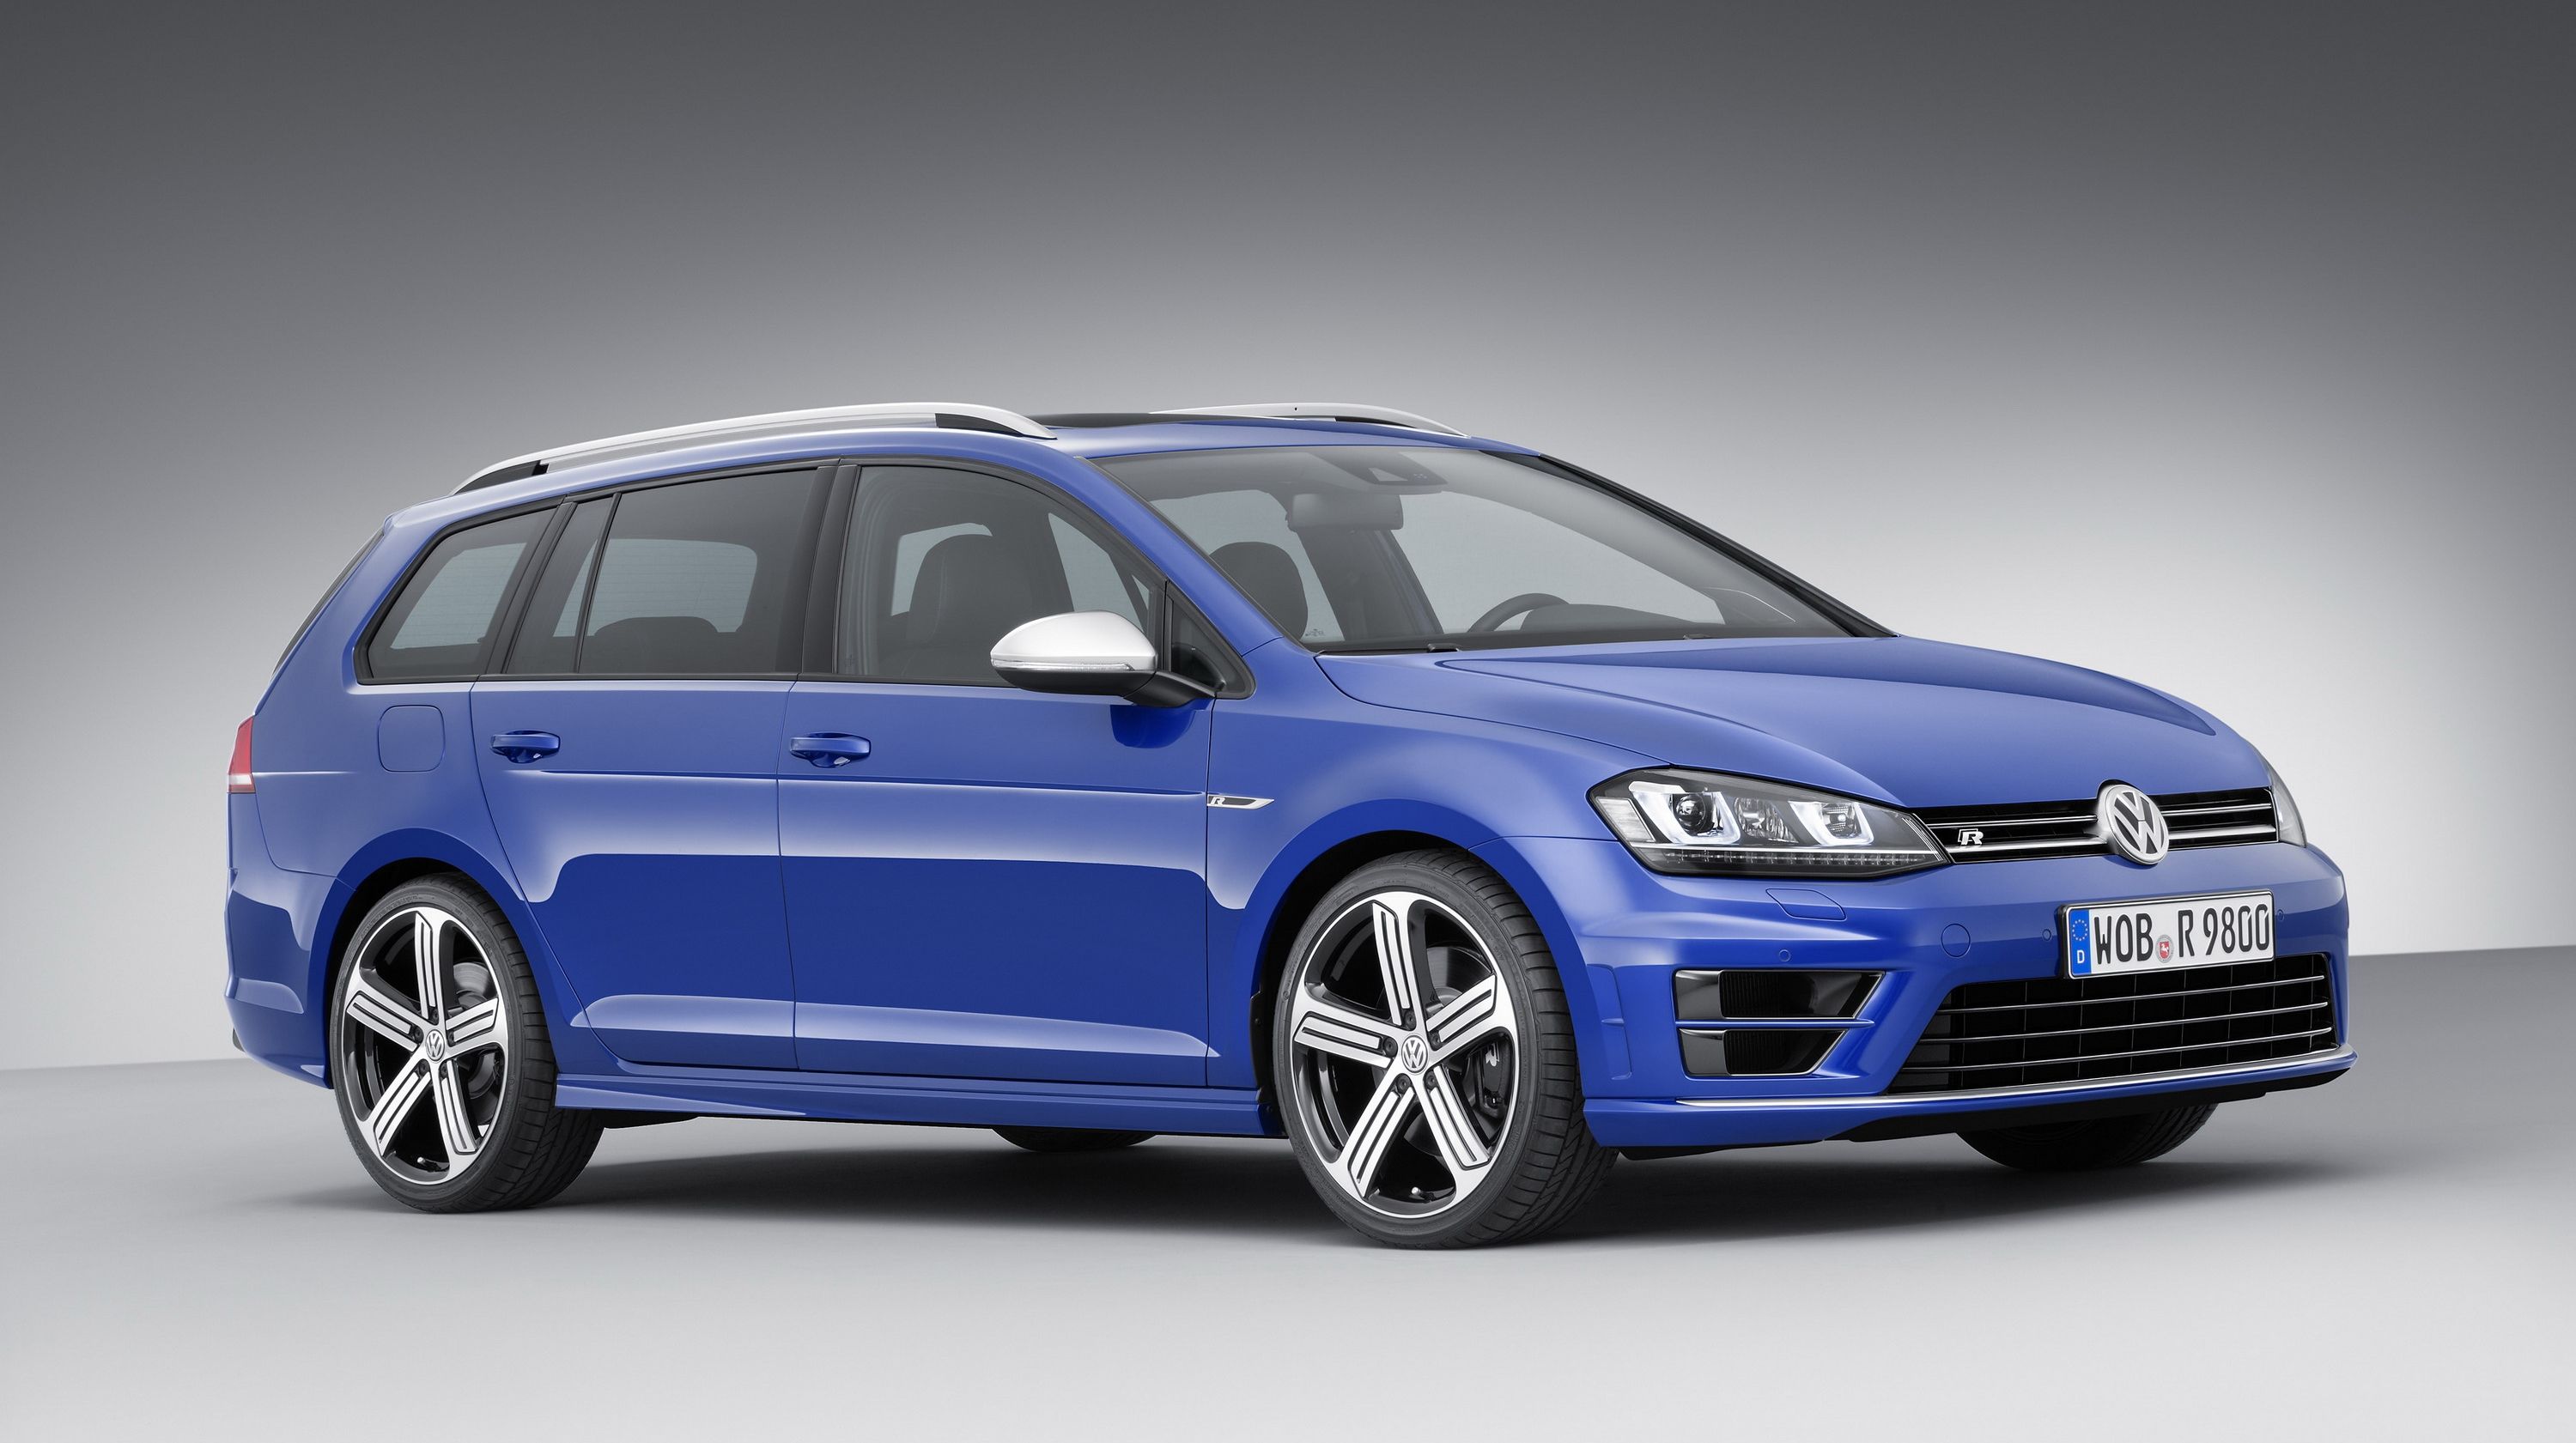  We saw it coming via spy shots, and here it is: the Golf R Variant. Oddly enough, it's debuting at the 2014 LA Auto Show but all signs still point to it being a Europe-only model. 